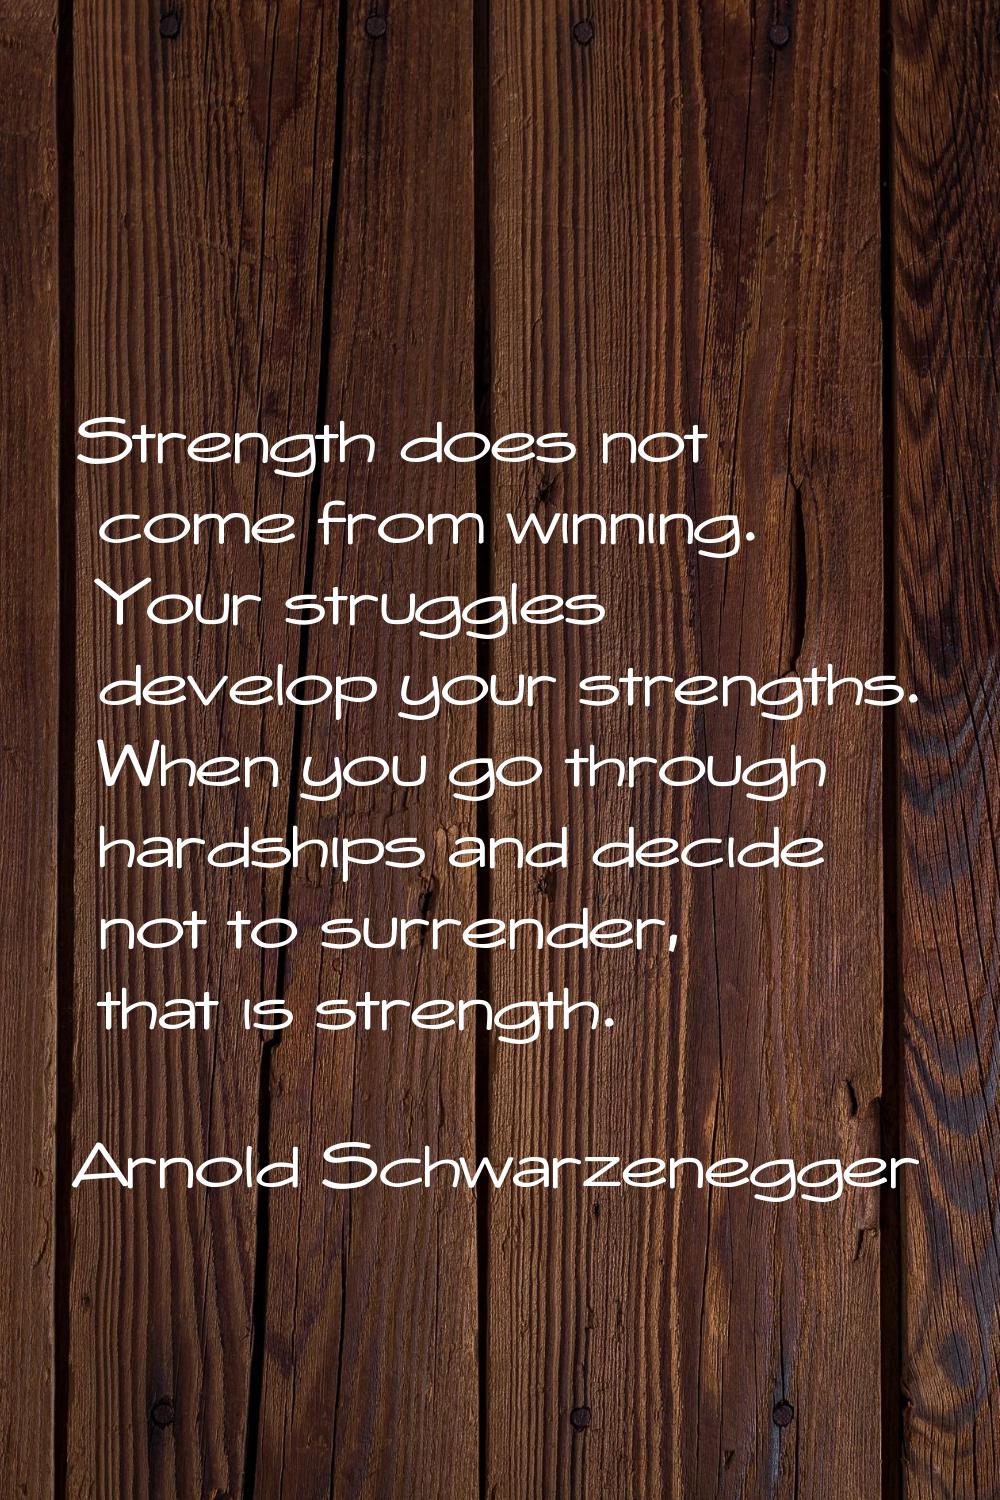 Strength does not come from winning. Your struggles develop your strengths. When you go through har